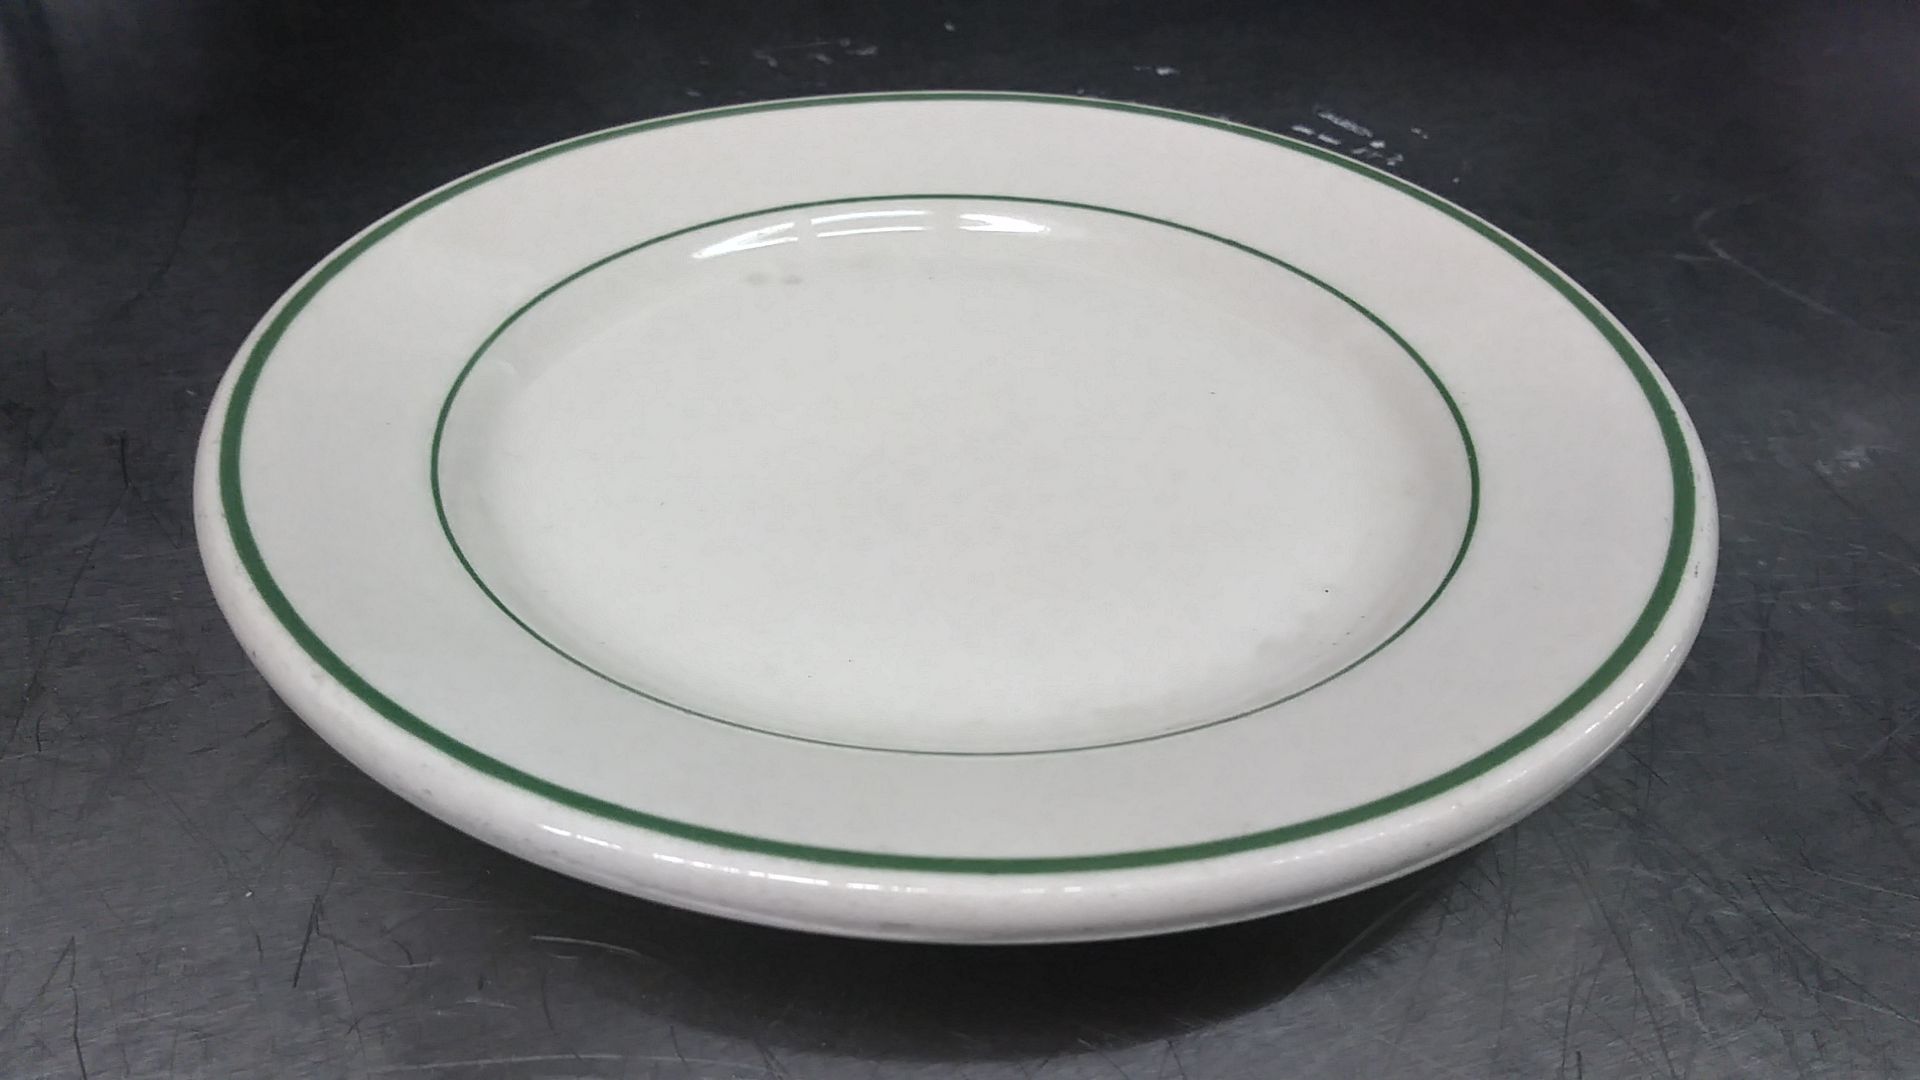 8" PLATES (INCLUDES QTY 100)